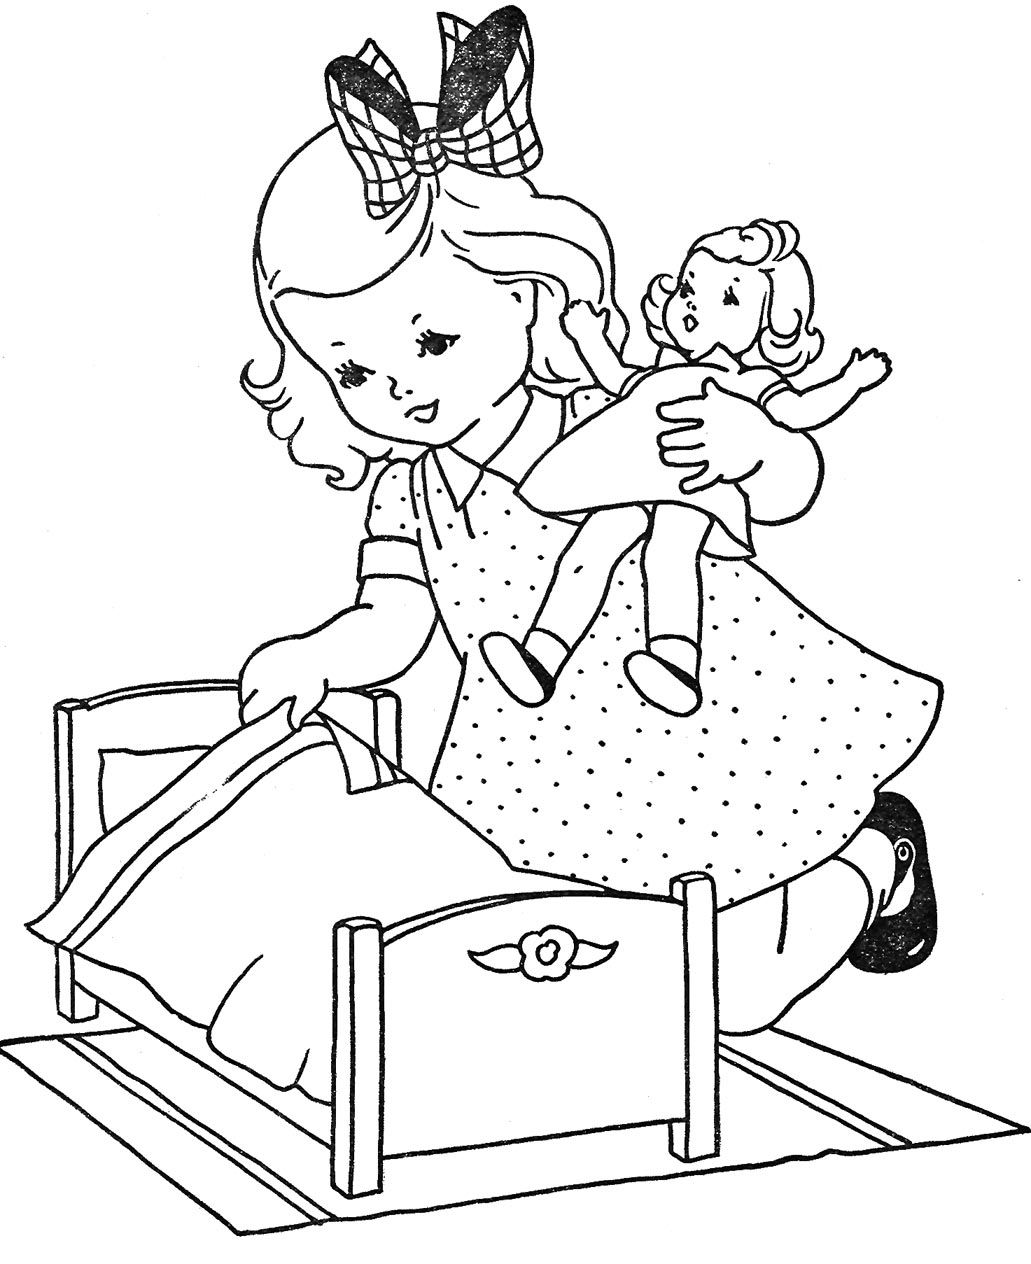 Doll Coloring Pages - Best Coloring Pages For Kids